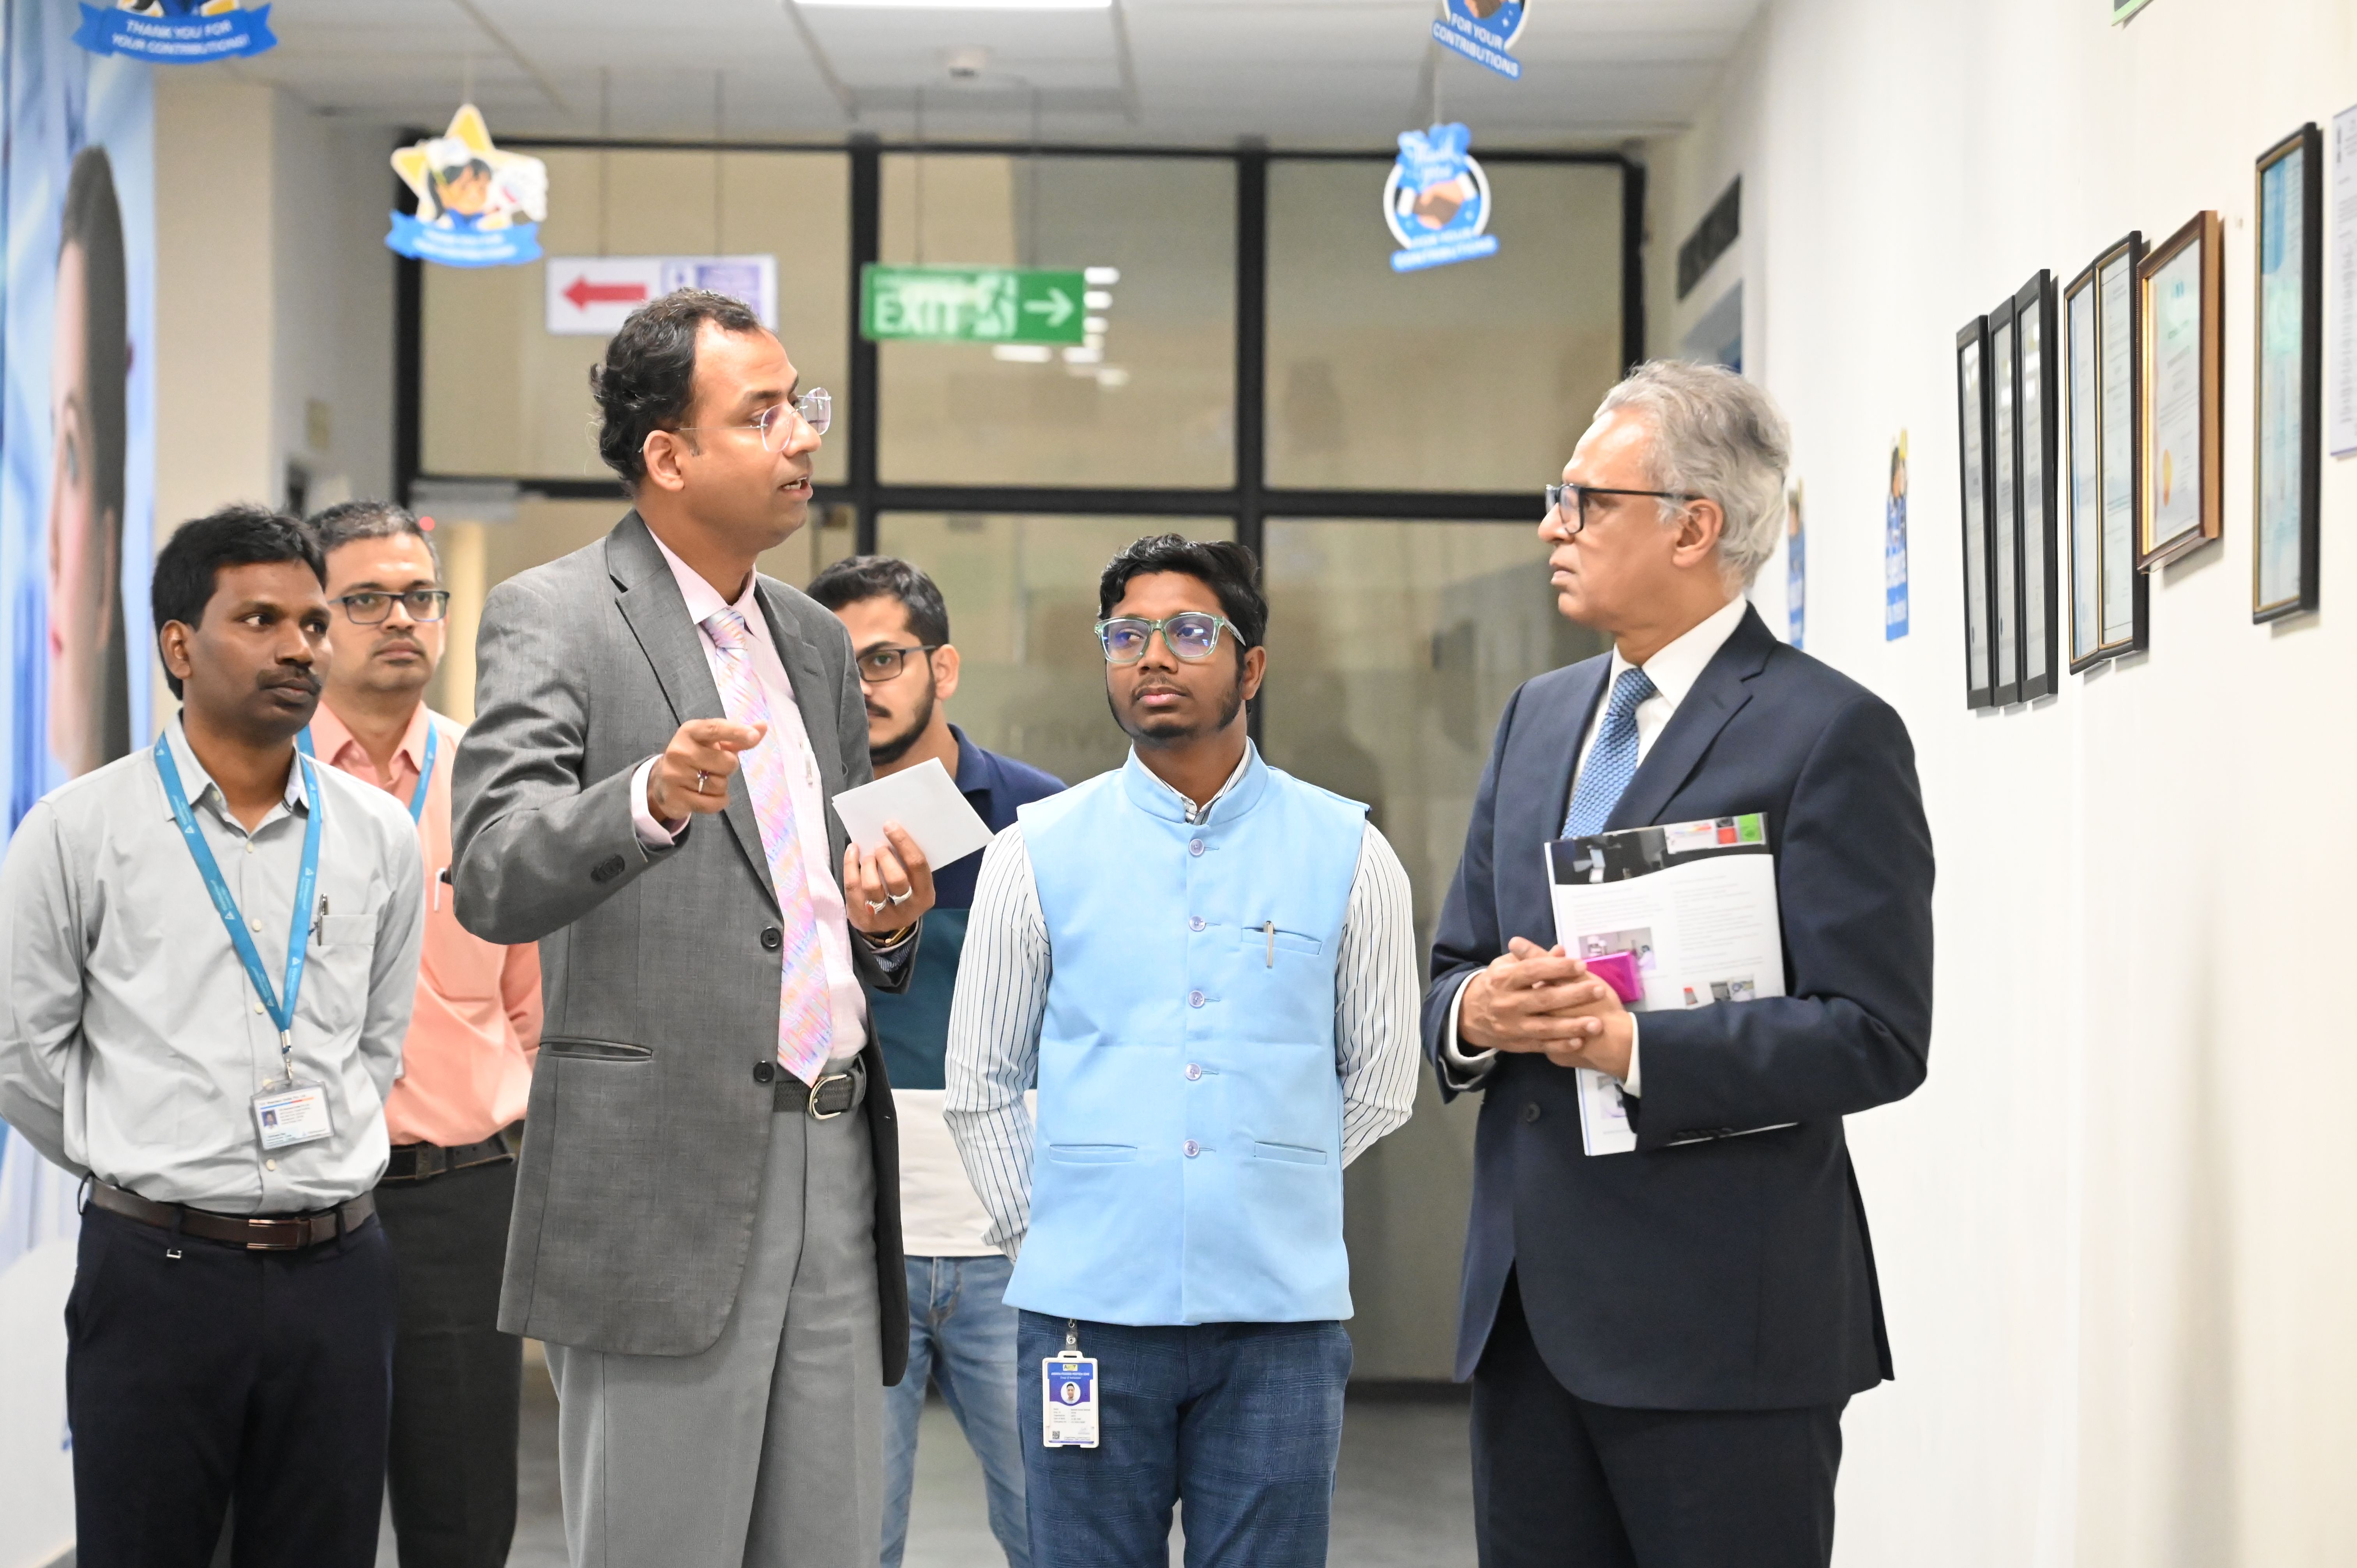 Mr. Syed Akbaruddin - Former Permanent Representative of India to UN with Dr Jitendra Sharma at AMTZ Med Tech and Health Technology in India